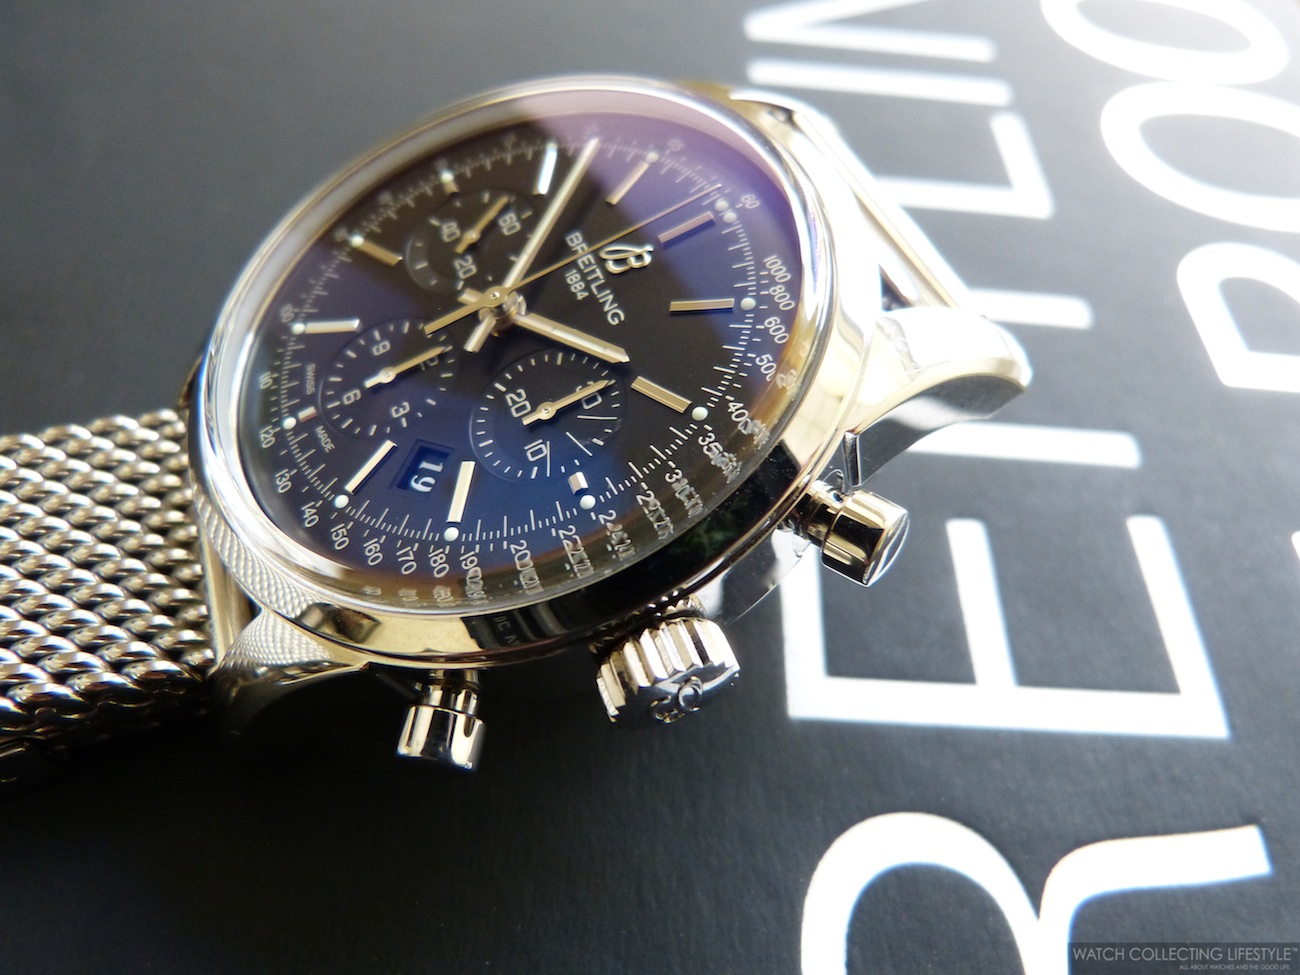 Breitling Transocean Chronograph for Rs.239,807 for sale from a